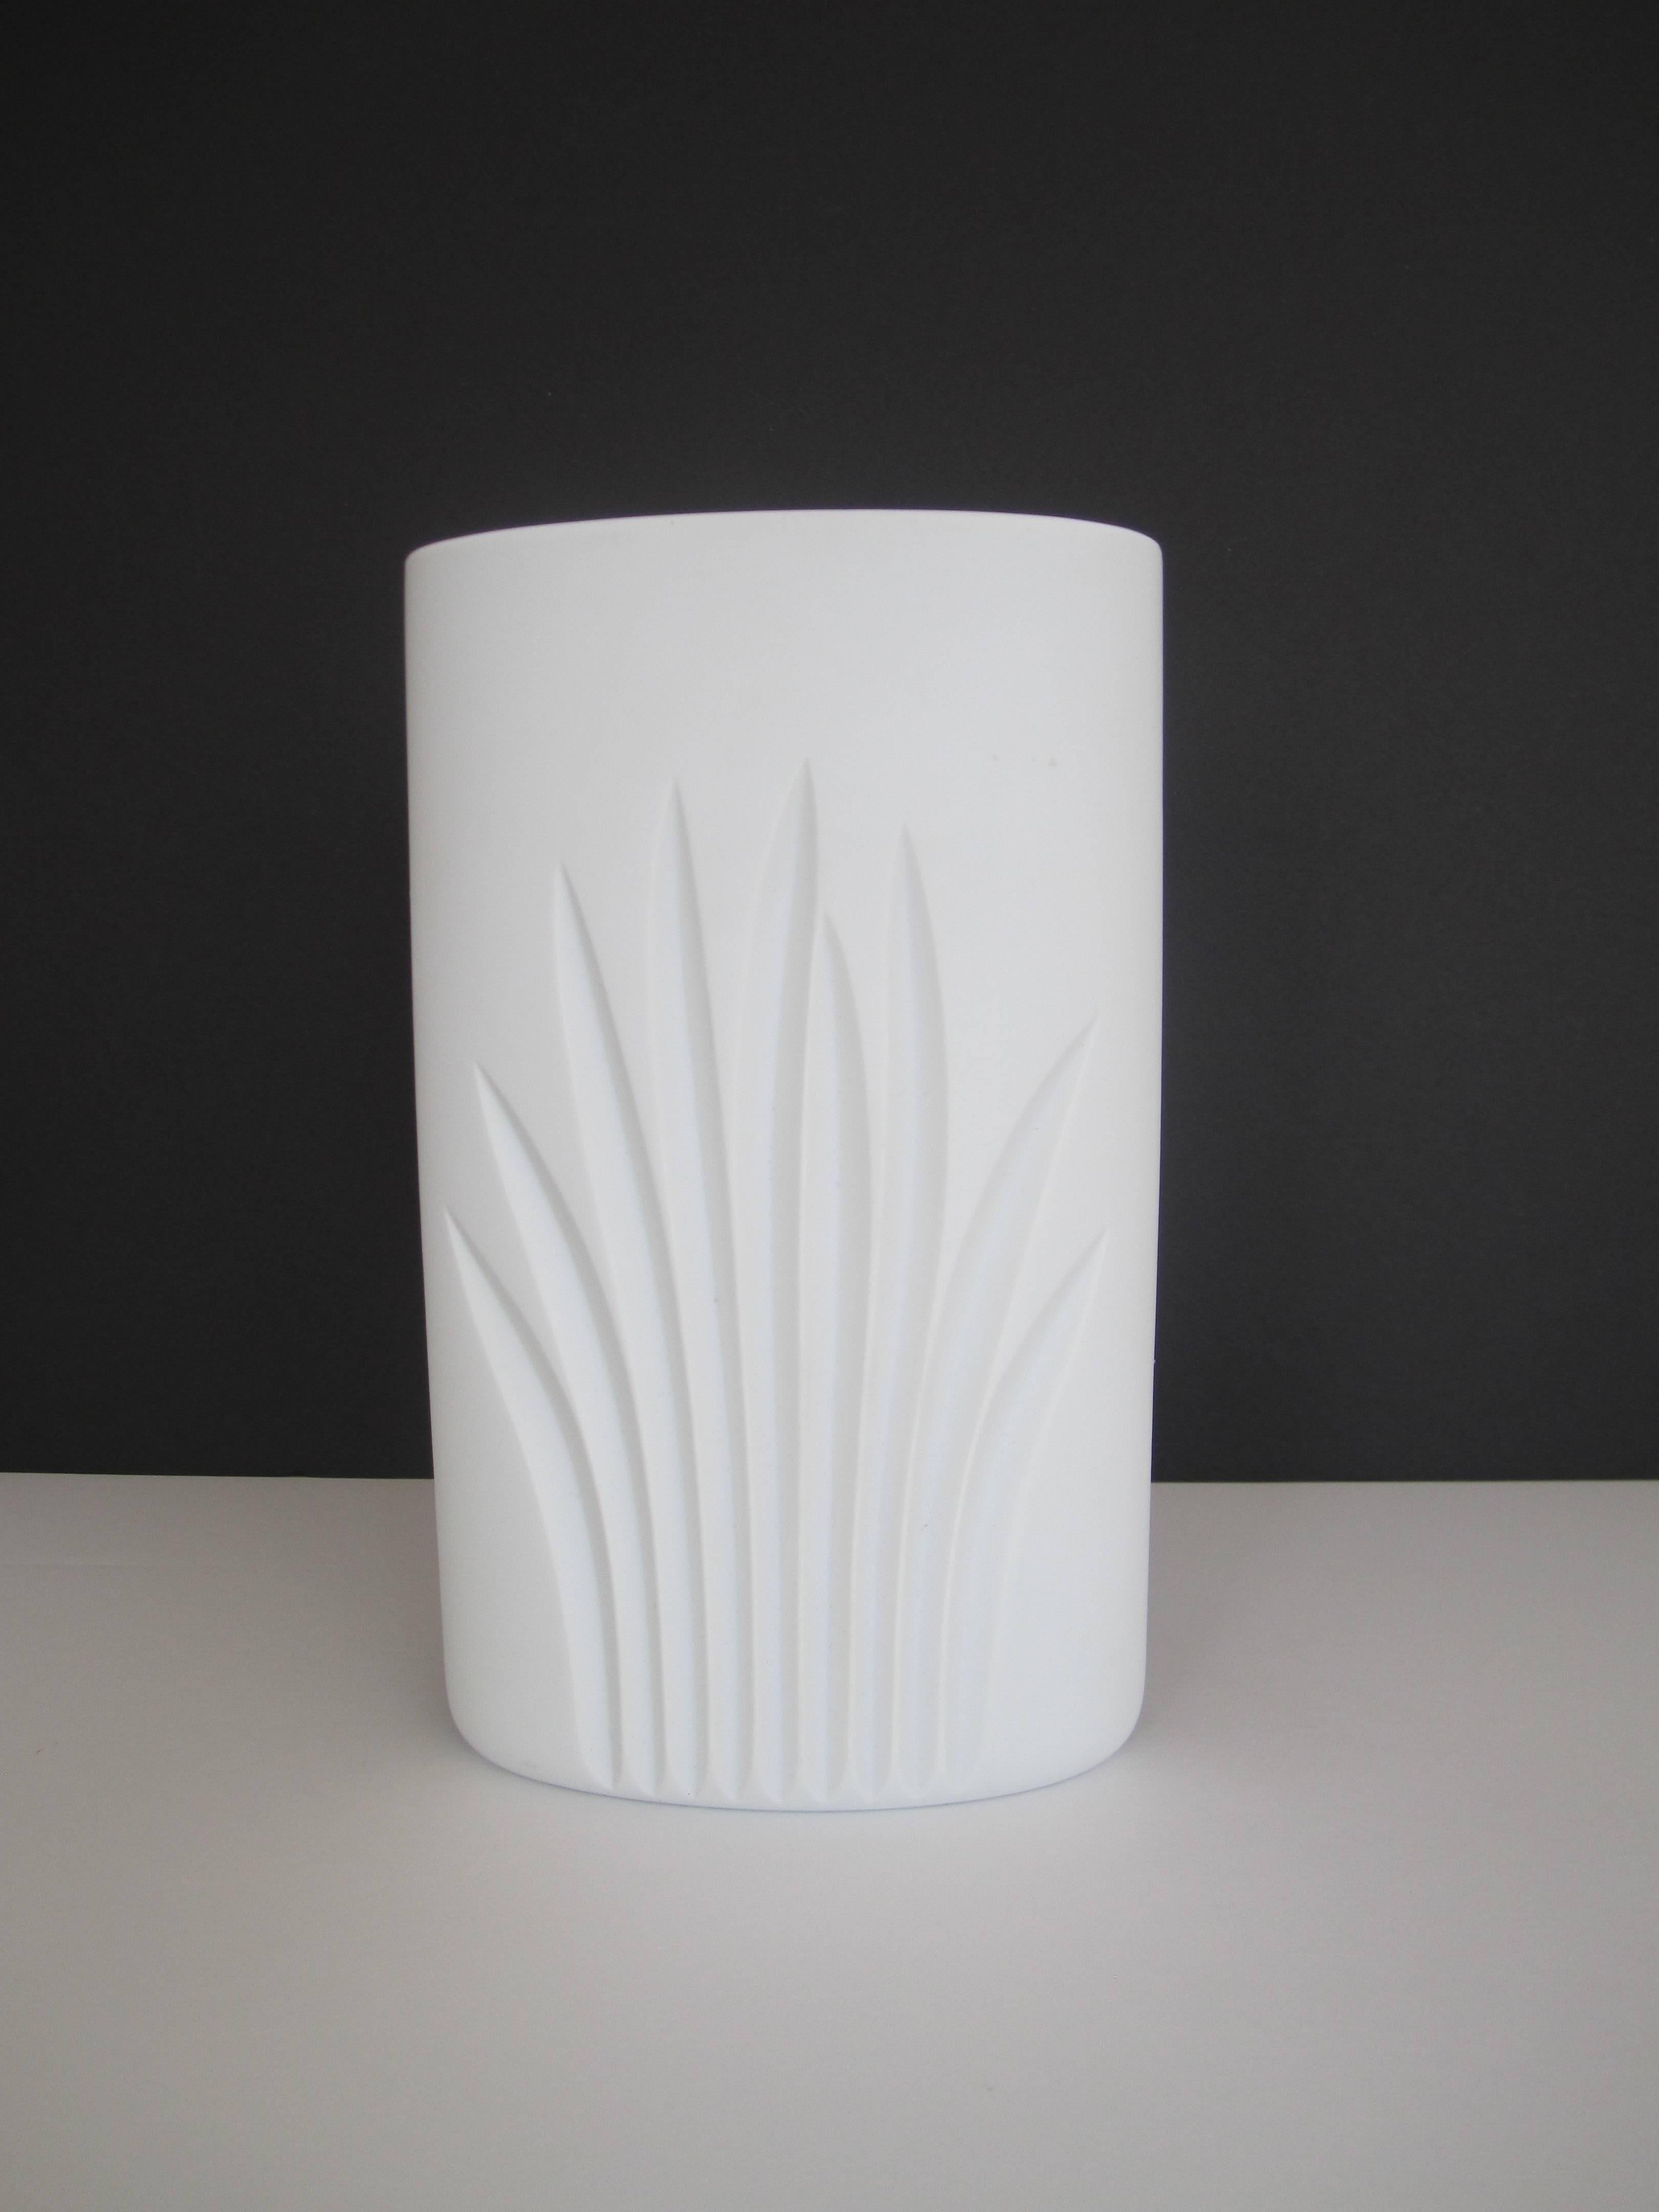 A white matte porcelain ceramic pottery vase by Rosenthal Studio-Line Collection, Germany. Oval in shape with identical organic modern design on both sides. Maker's mark and unique number on bottom as show in image #9. Beautiful with or without